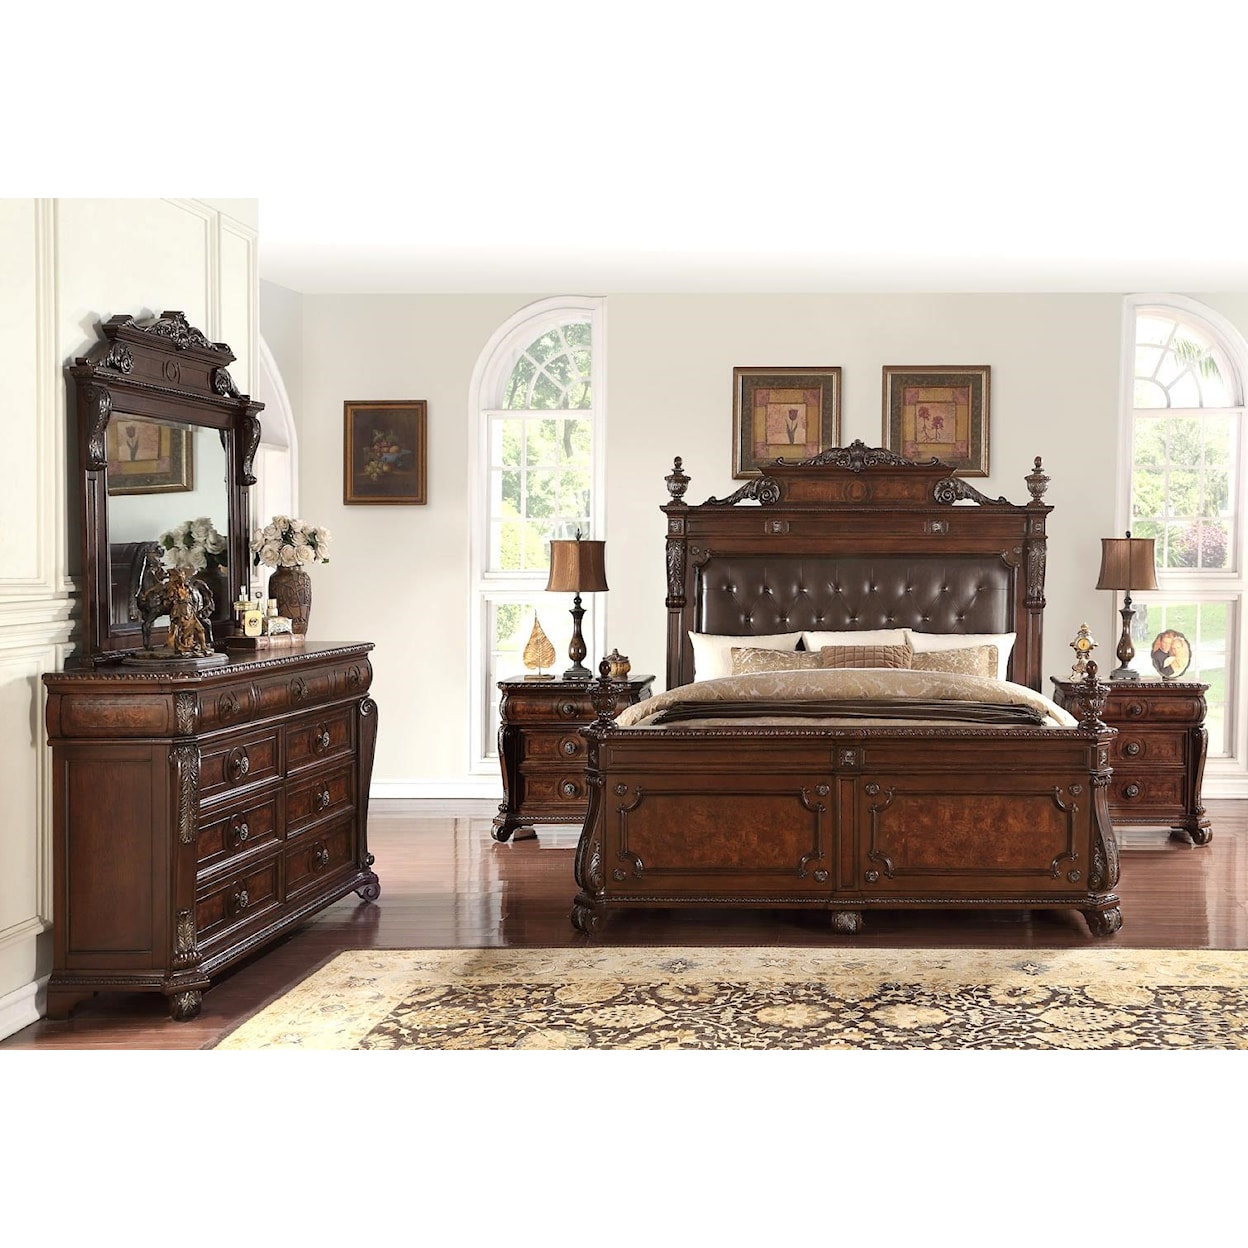 Home Insights Vintage 5 Piece Genevieve Bed Group